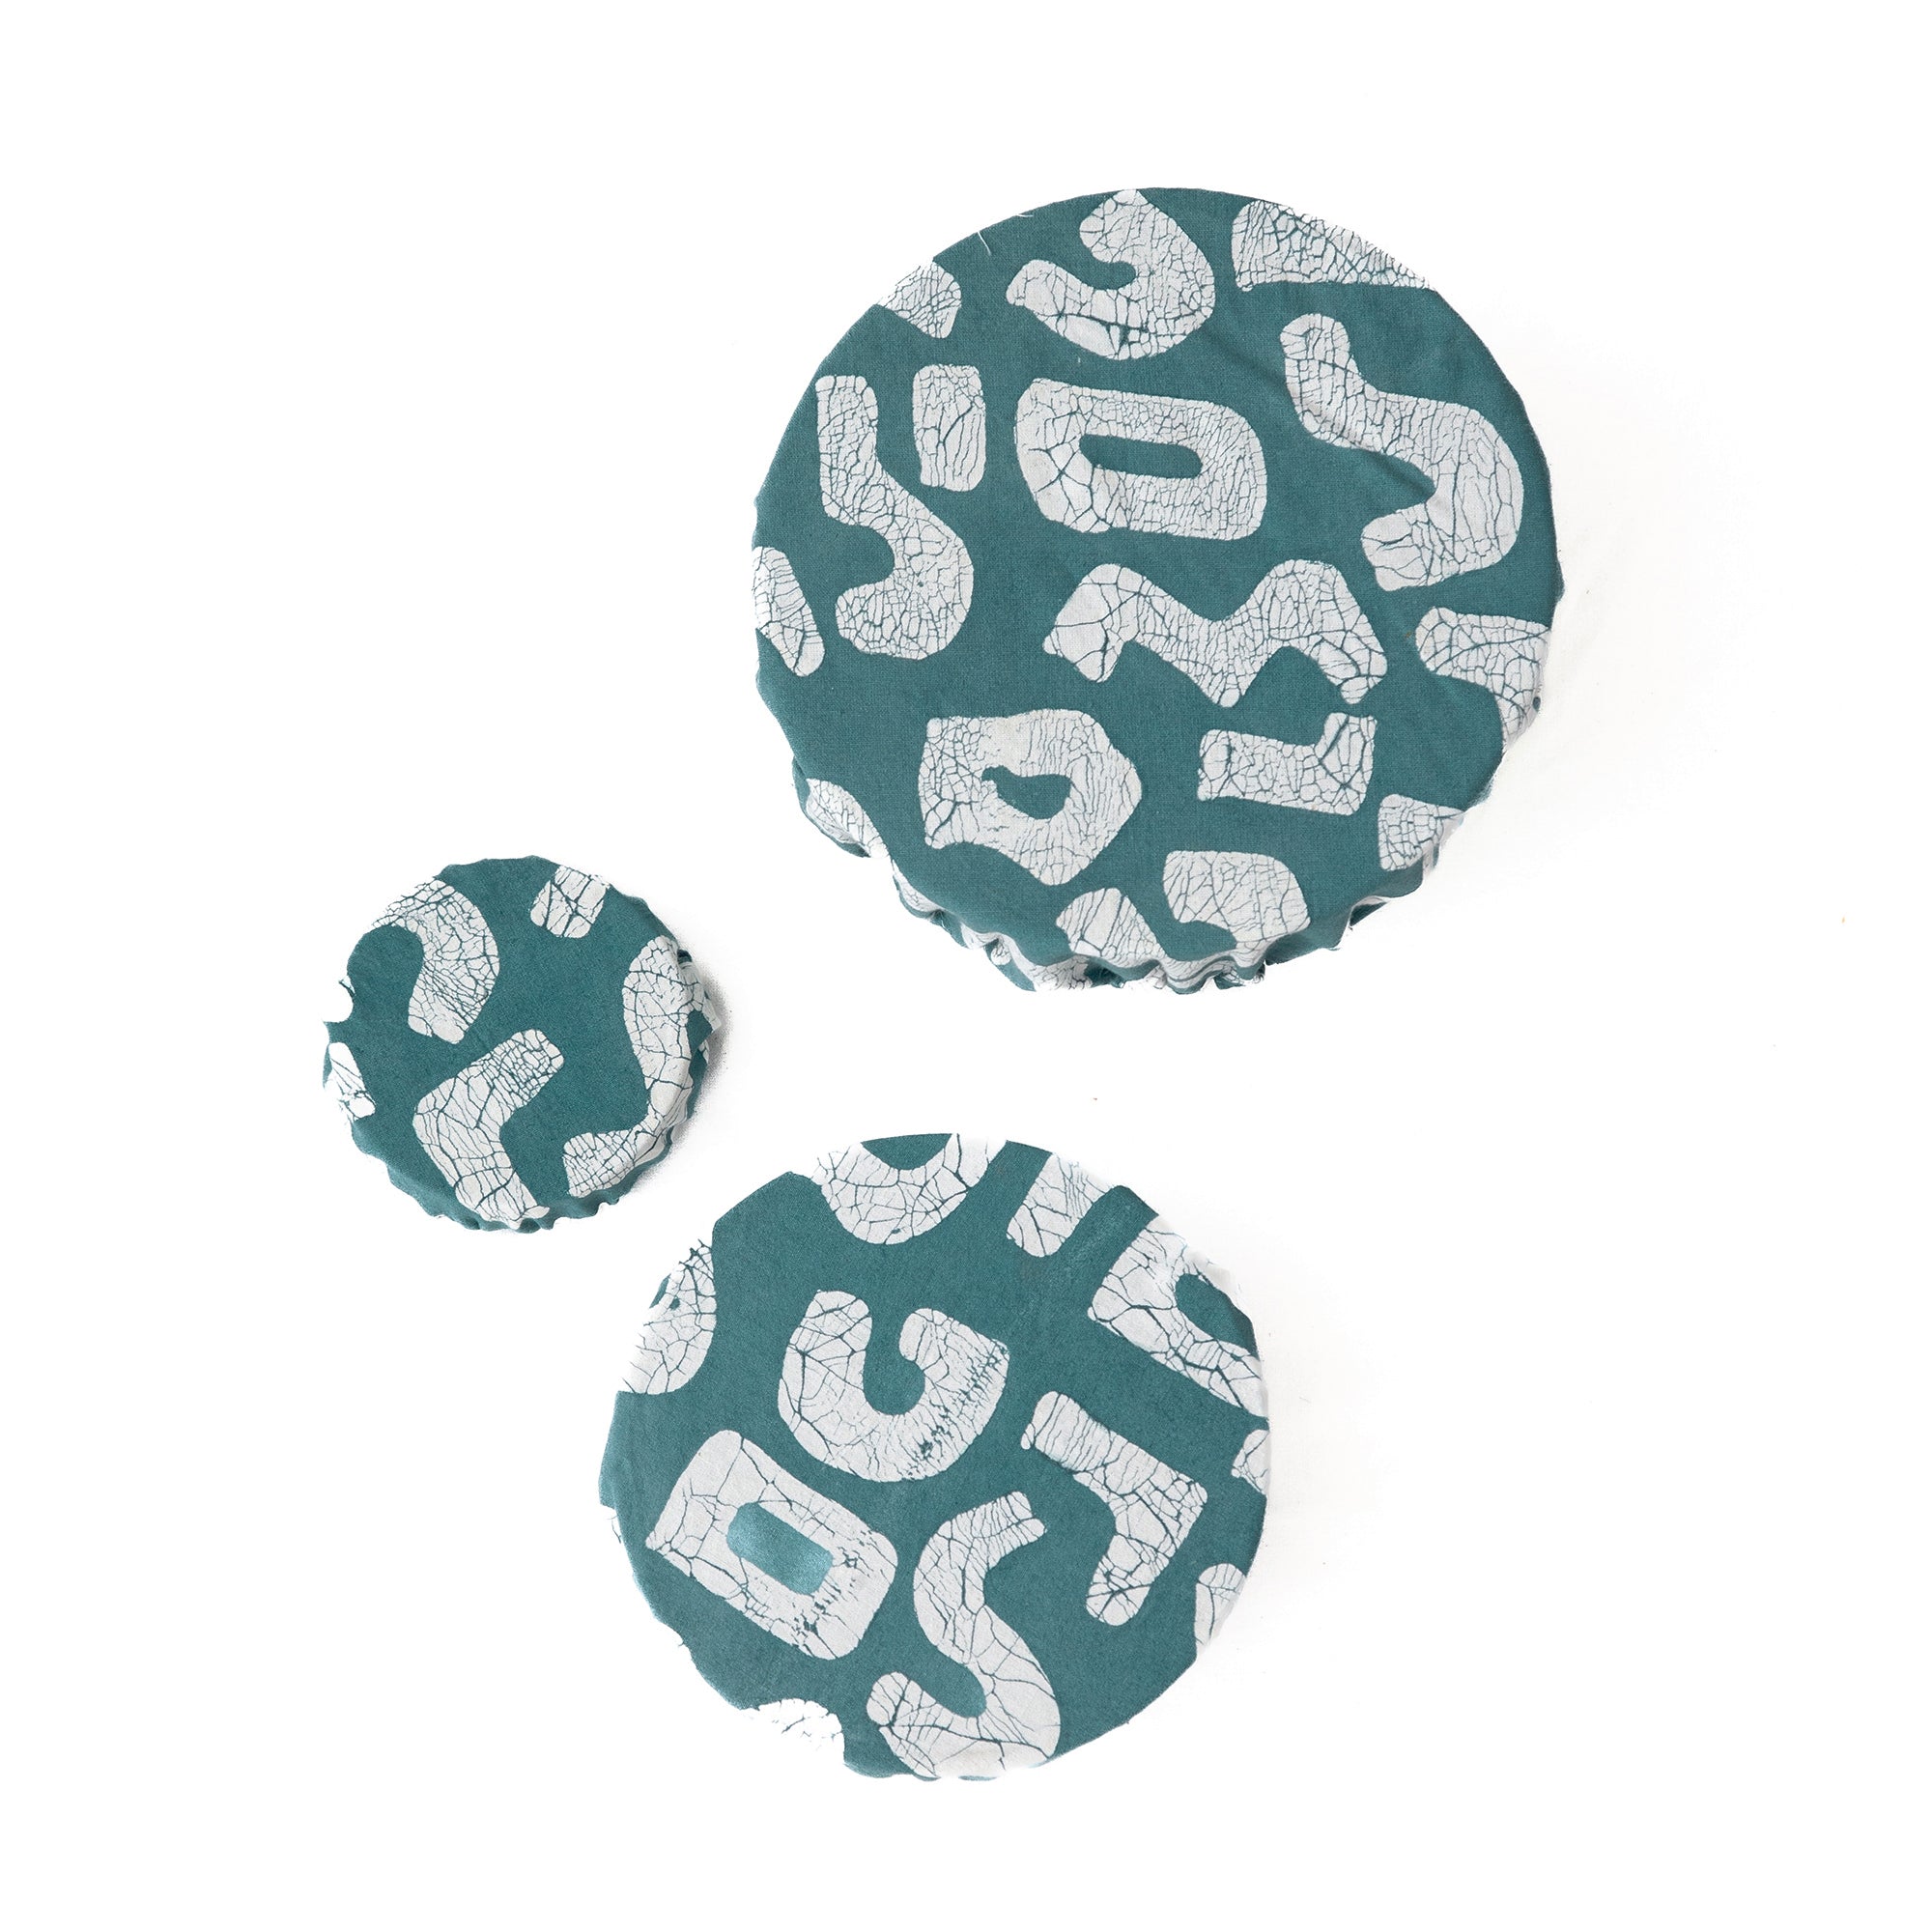 Keep fabulously fresh with our hand-painted teal bowl covers, made to last a lifetime with sustainable goodness.